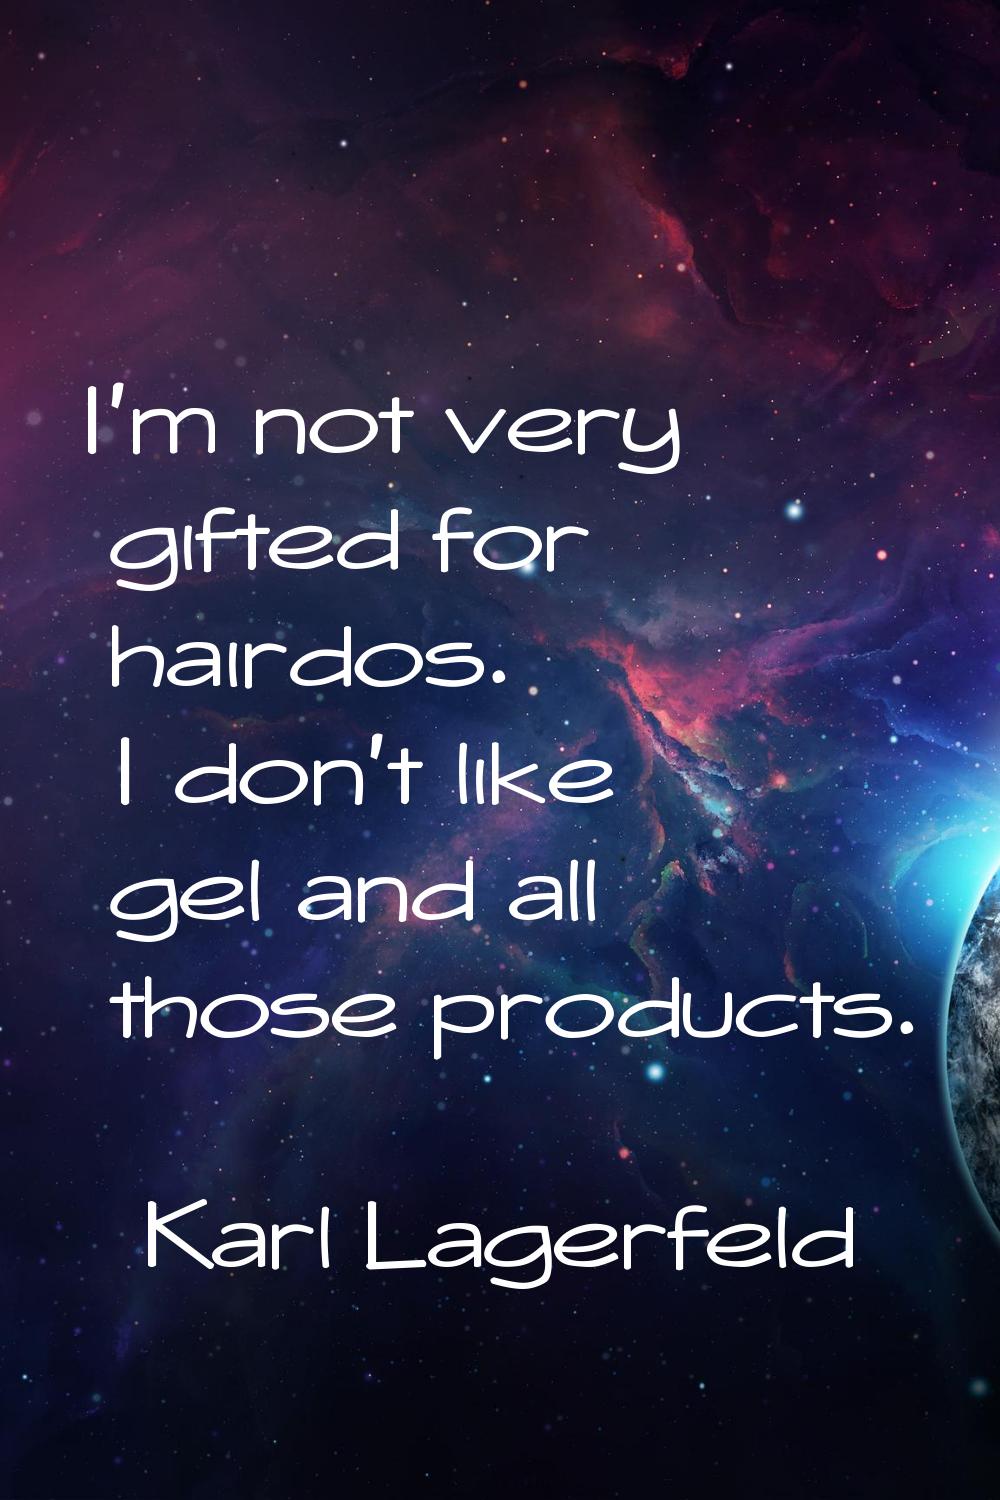 I'm not very gifted for hairdos. I don't like gel and all those products.